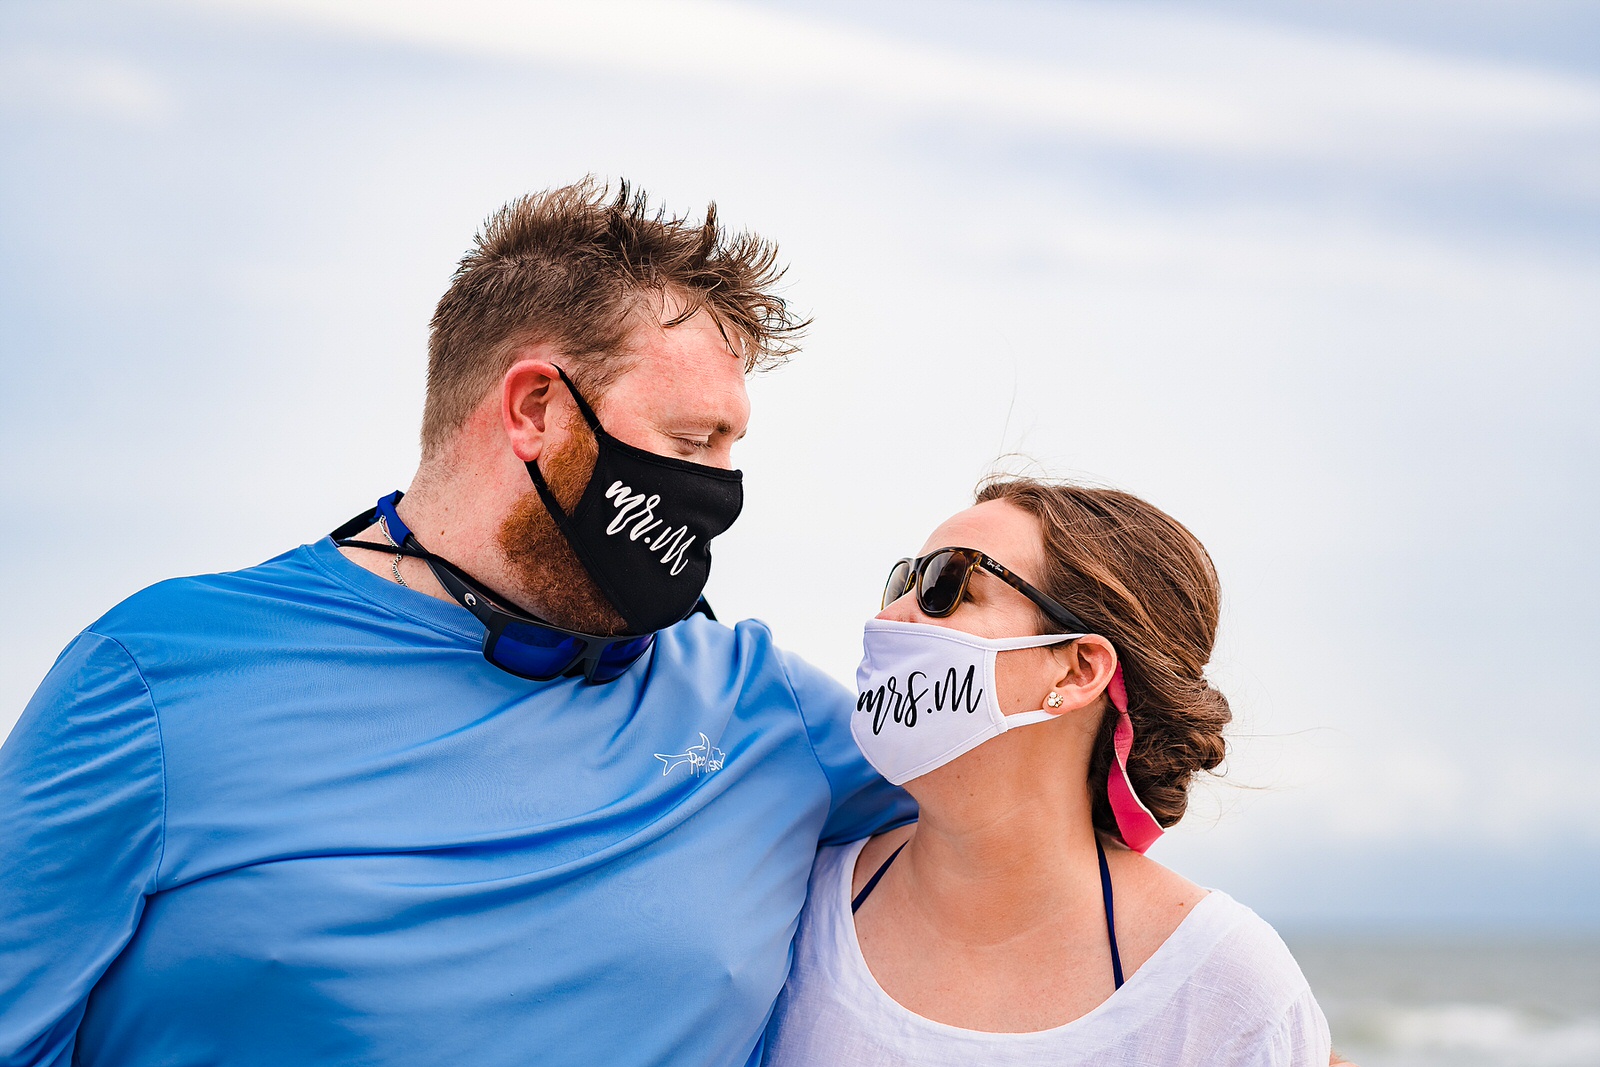 Bride and groom wear mr. and mrs. face masks at their casual beach wedding reception after their original plans were derailed due to Covid19